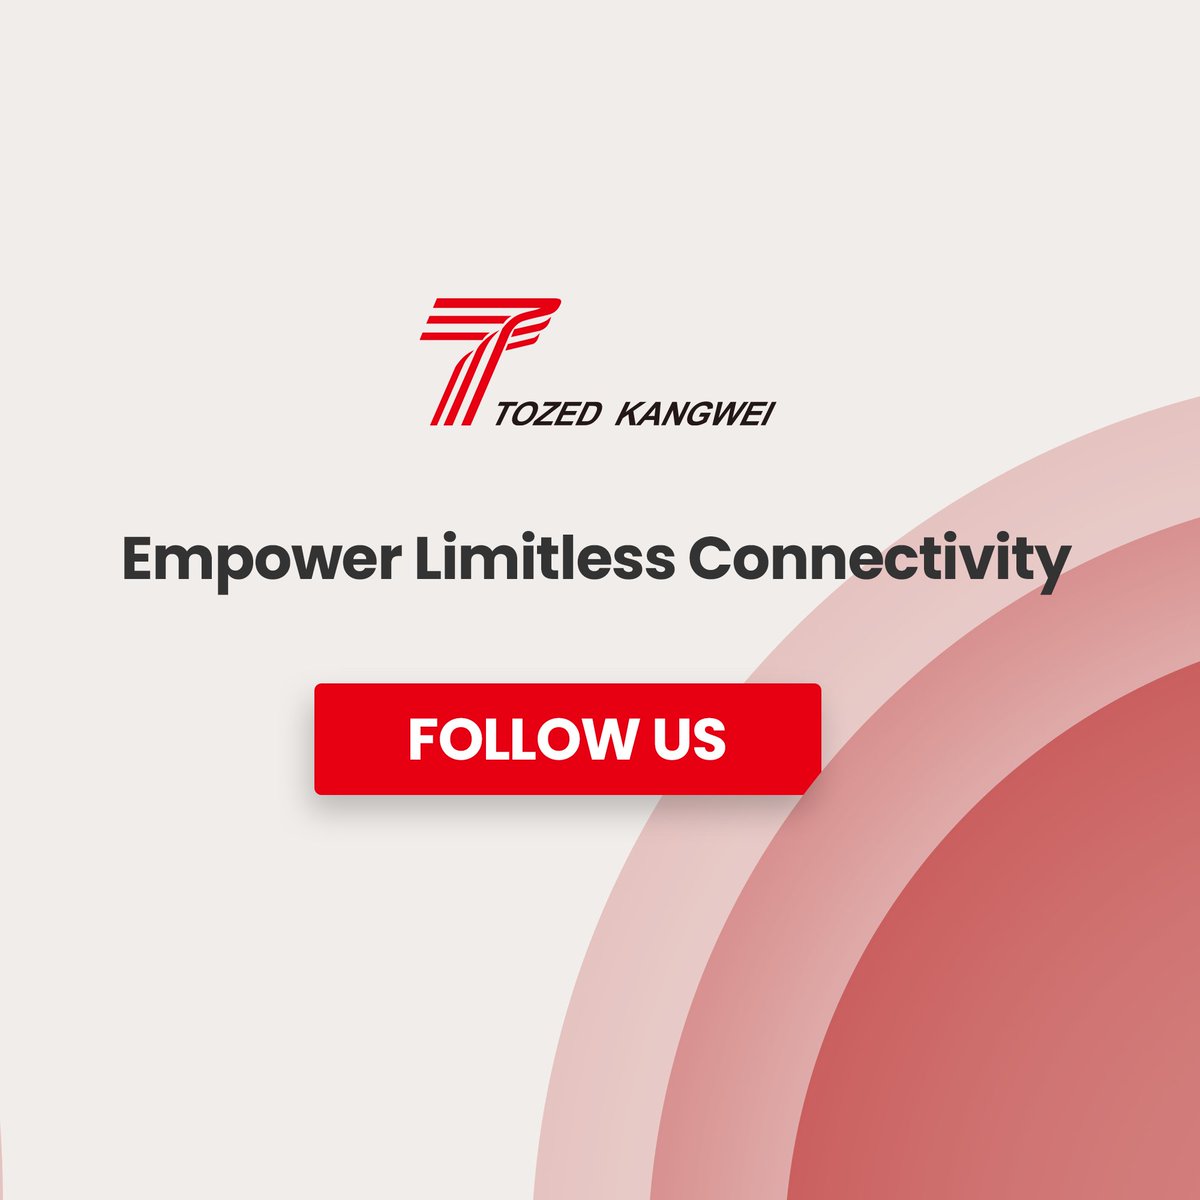 Tozed Kangwei proudly supplies over 100 telecom operators worldwide with a full range of mobile and fixed broadband terminals. Connect with us today to shape the future of connectivity.

#TozedKangwei #ConnecttoBetterFuture